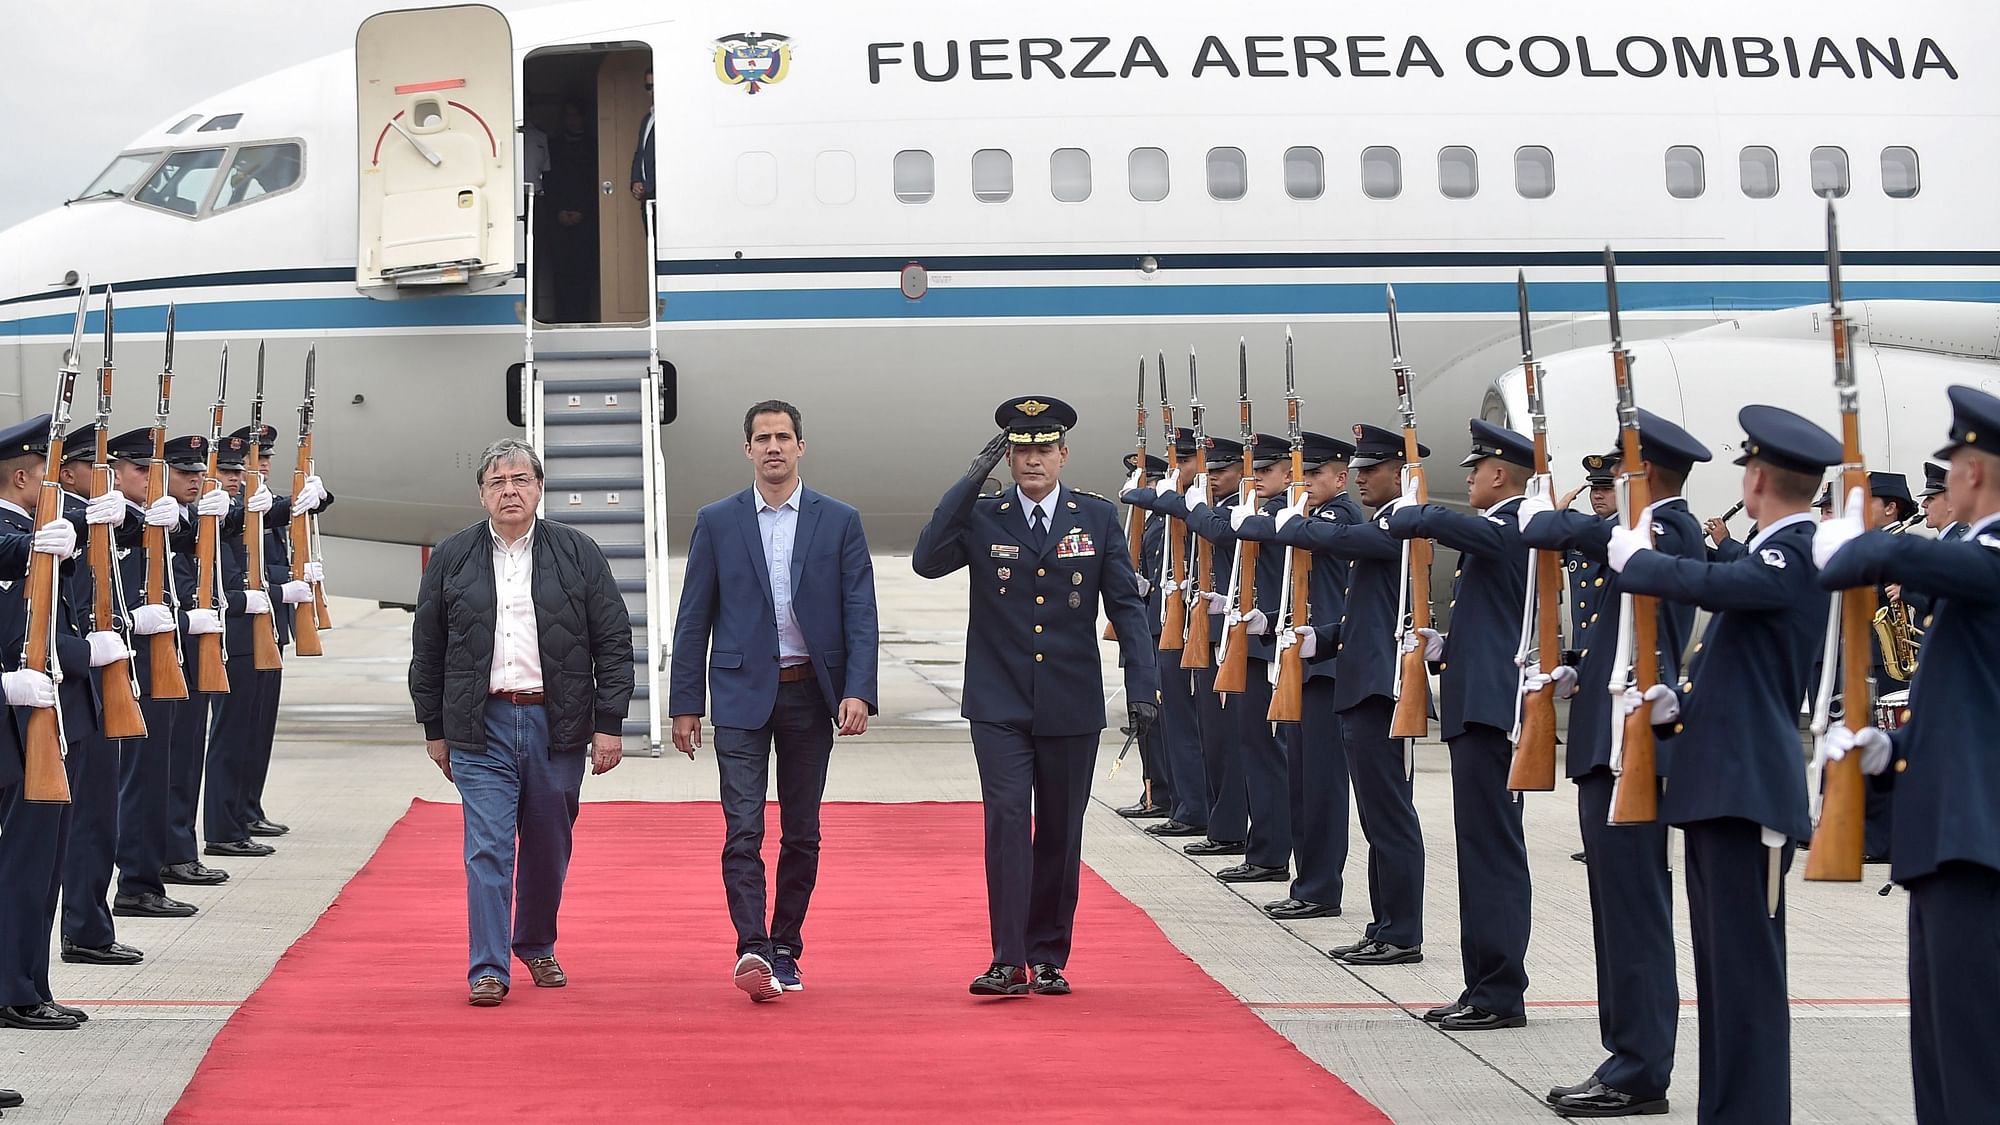 Venezuelan opposition leader Juan Guaido is escorted by Air Force Gen. Luis Carlos Cordoba (R) and Colombian Foreign Minister Carlos Holmes Trujillo during a welcome ceremony for him at the military airport in Bogota, Colombia, Sunday, 24 February.